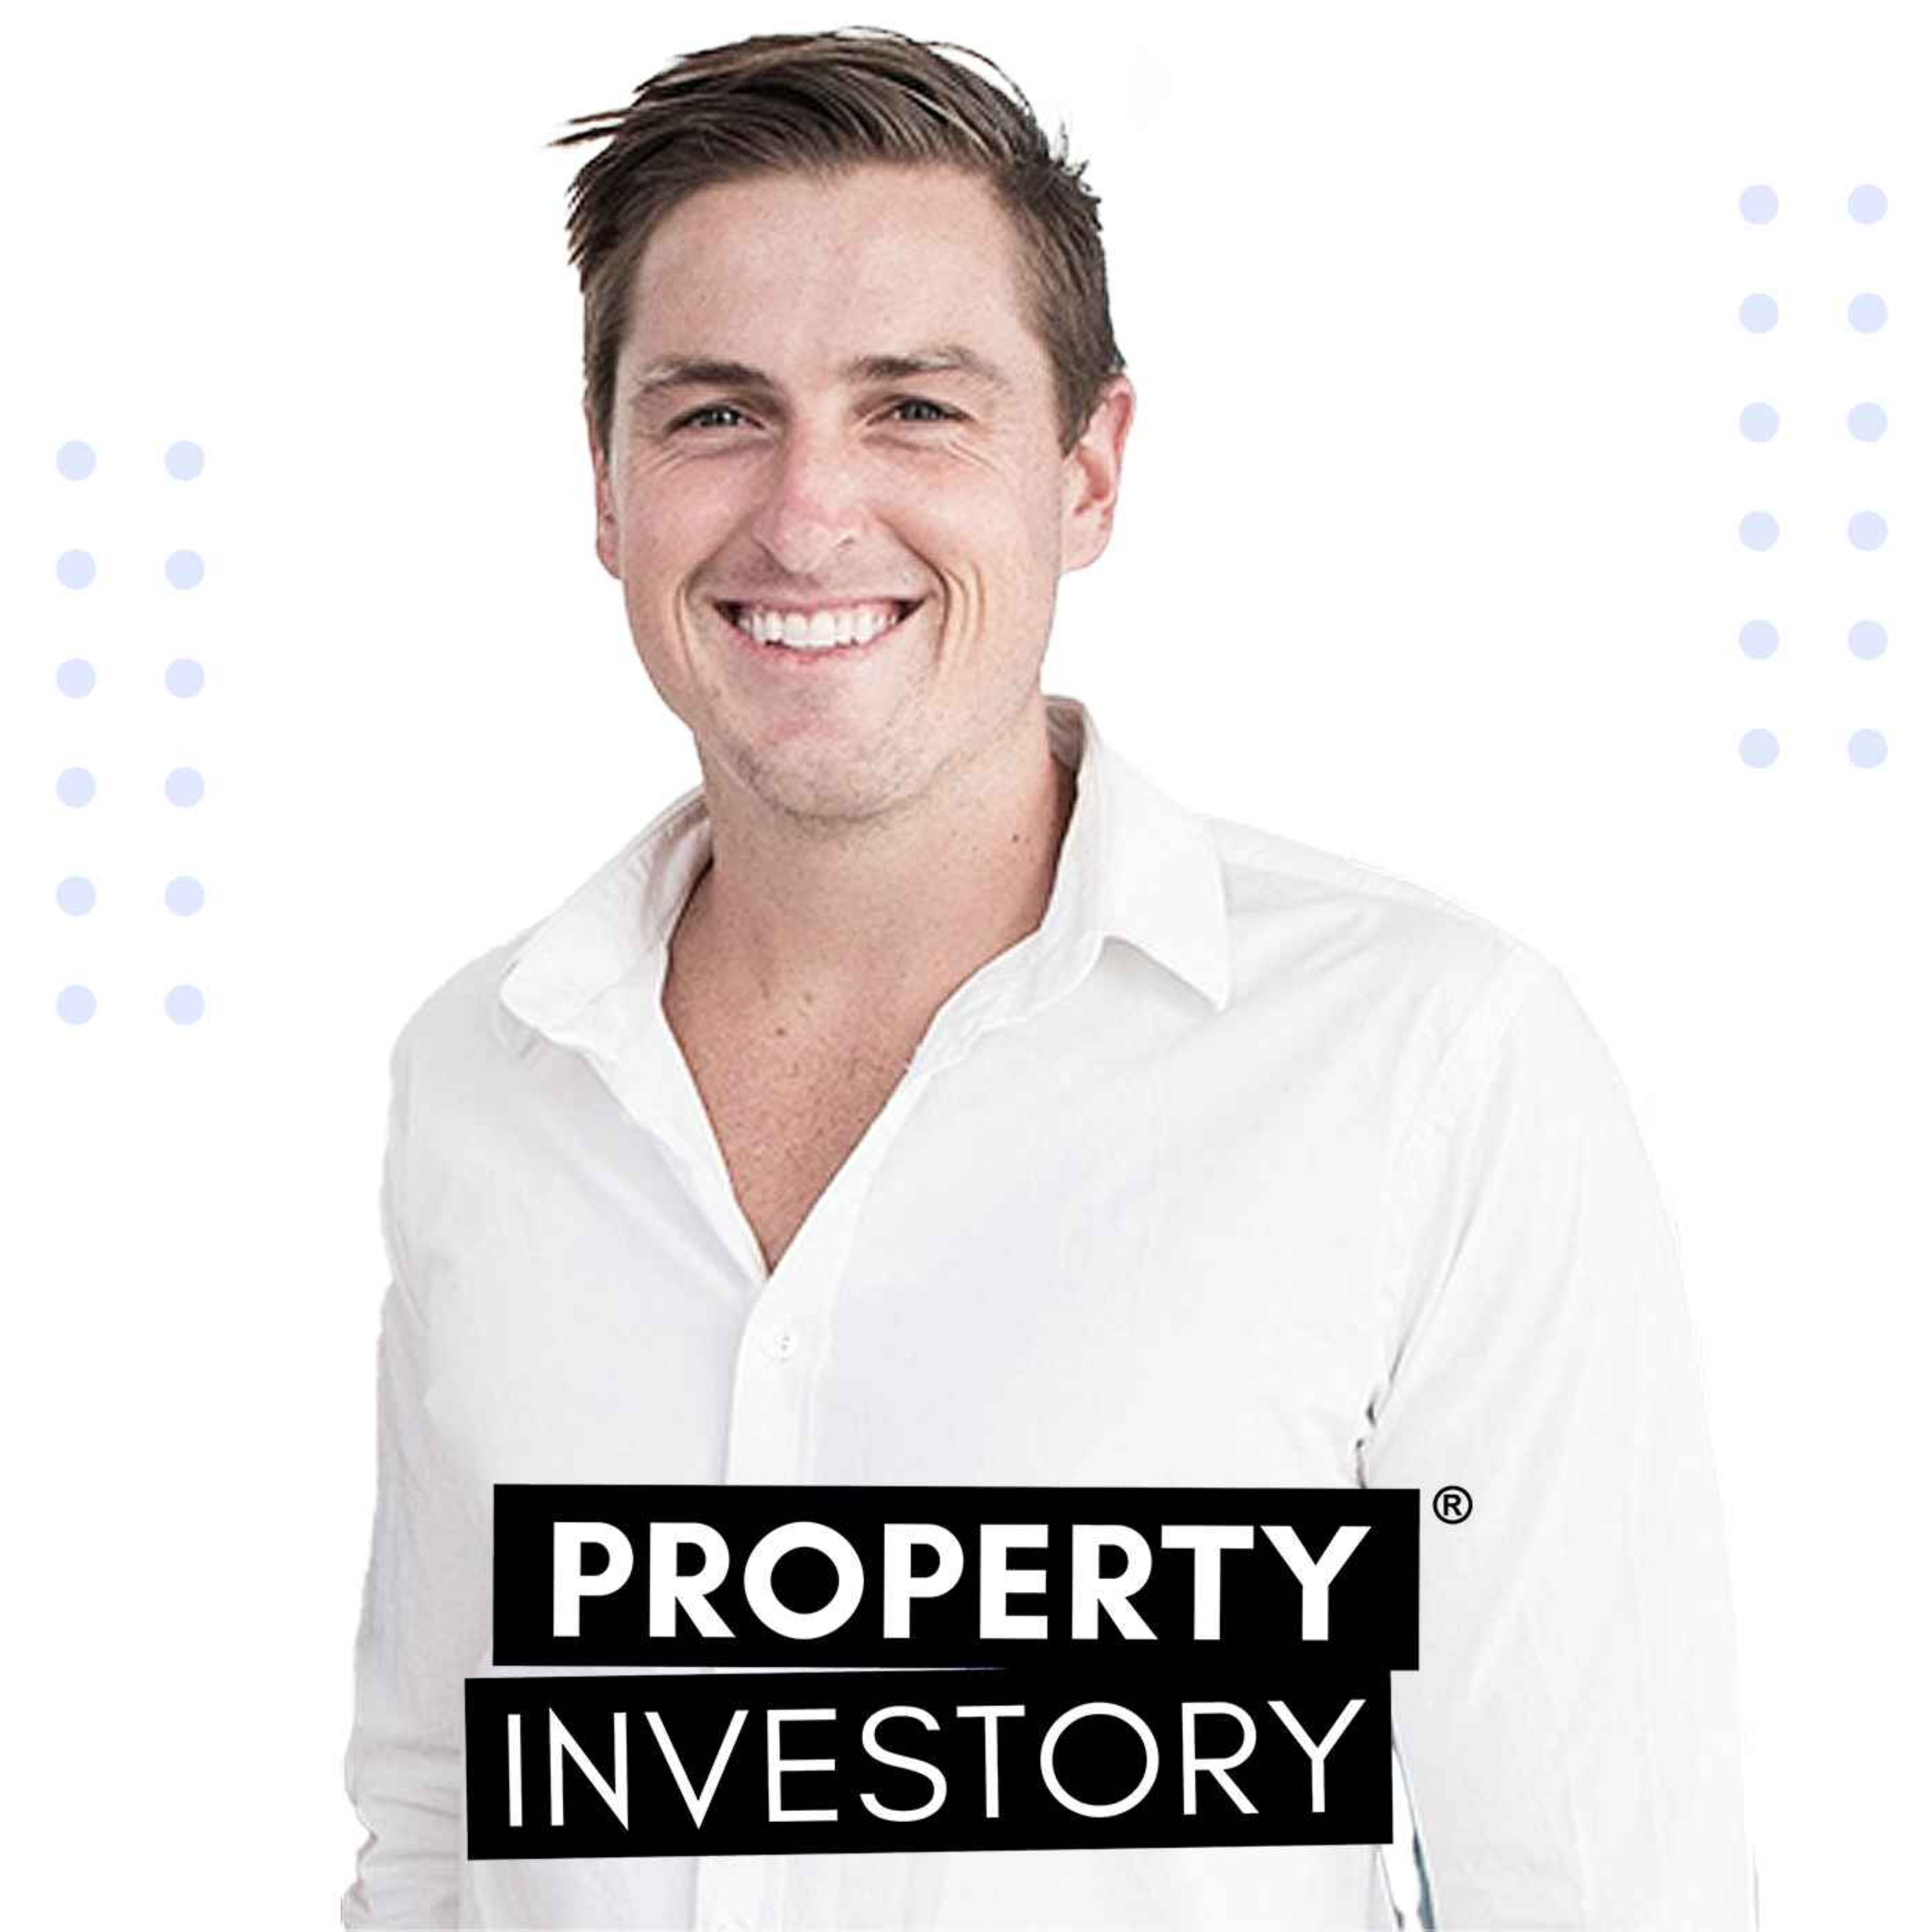 Ben Everingham’s Top 5 Investment Tips to Know by 31